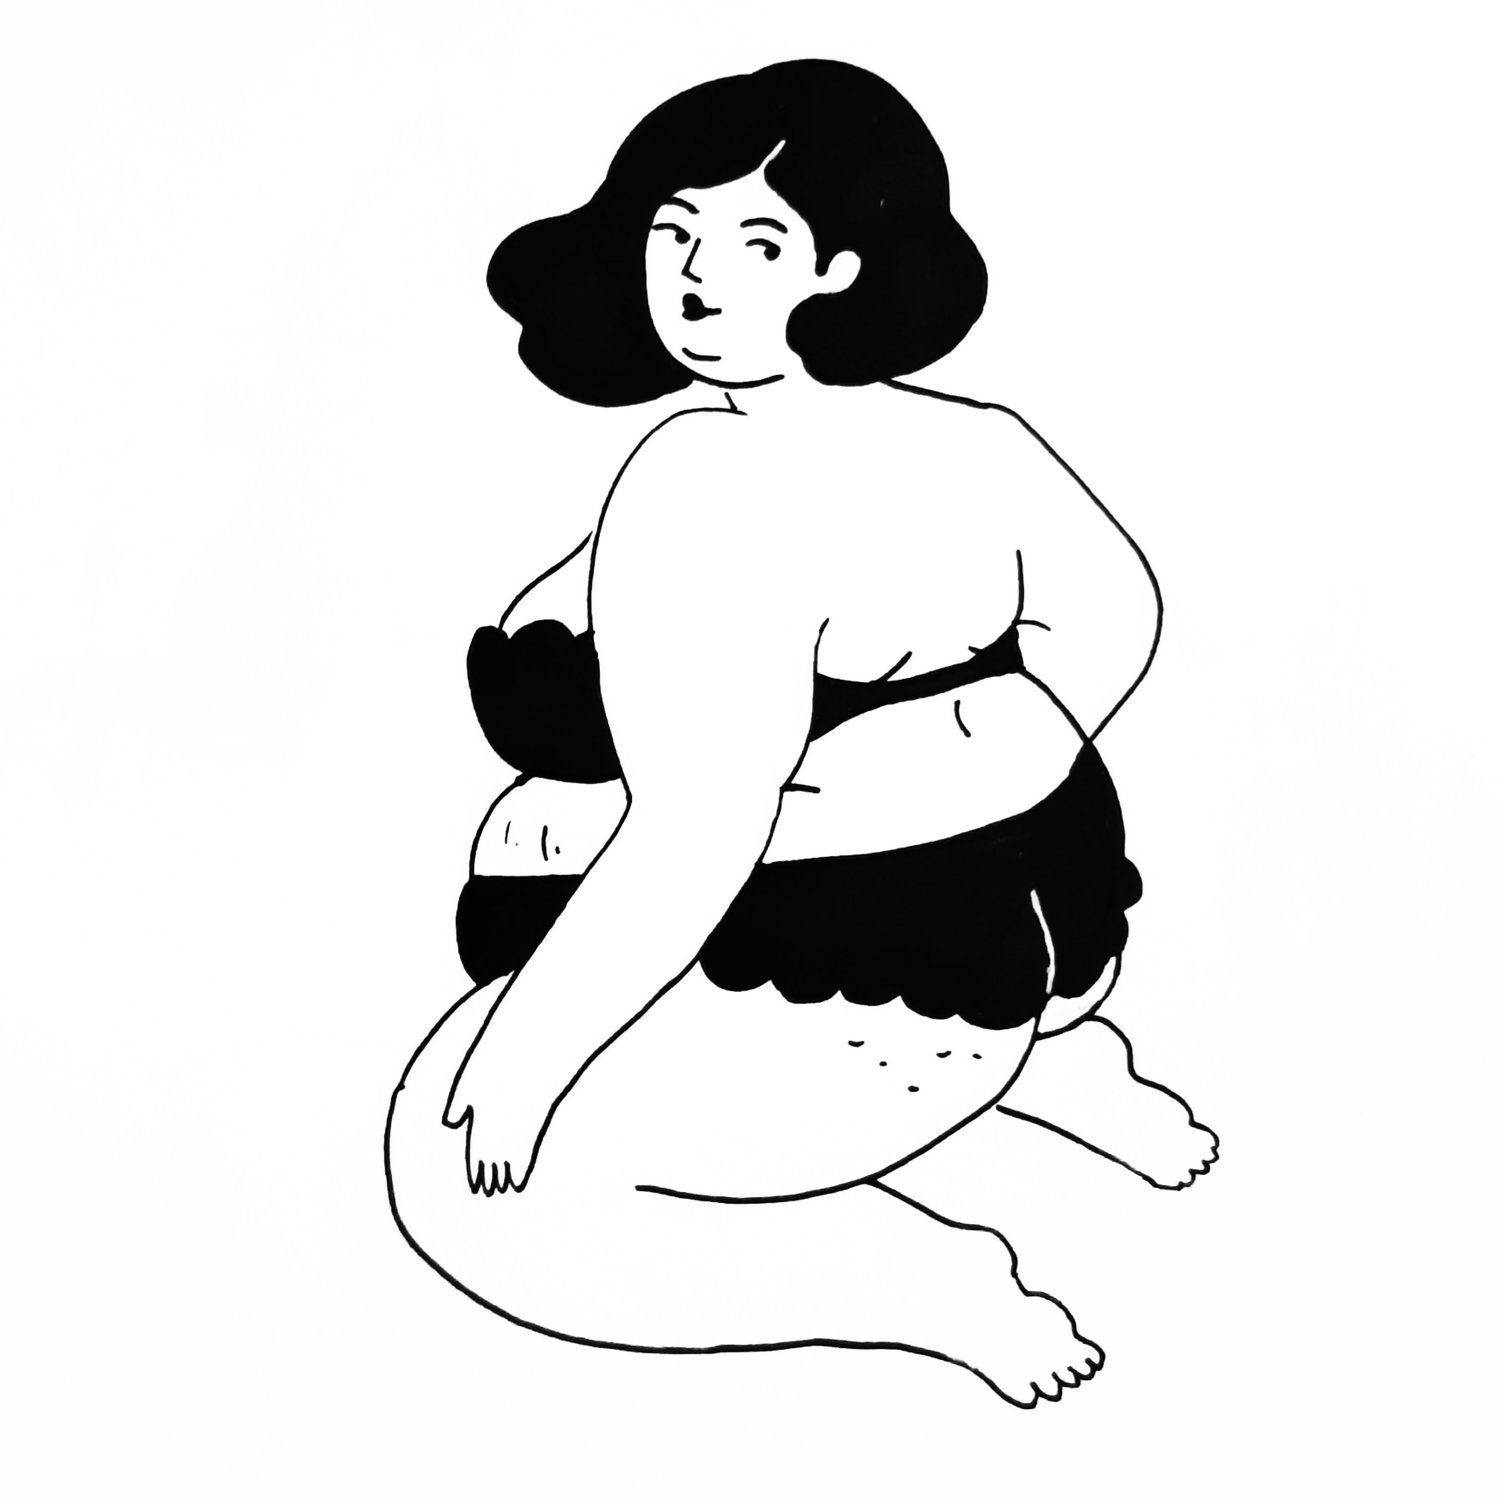 Image of Fat Jackie